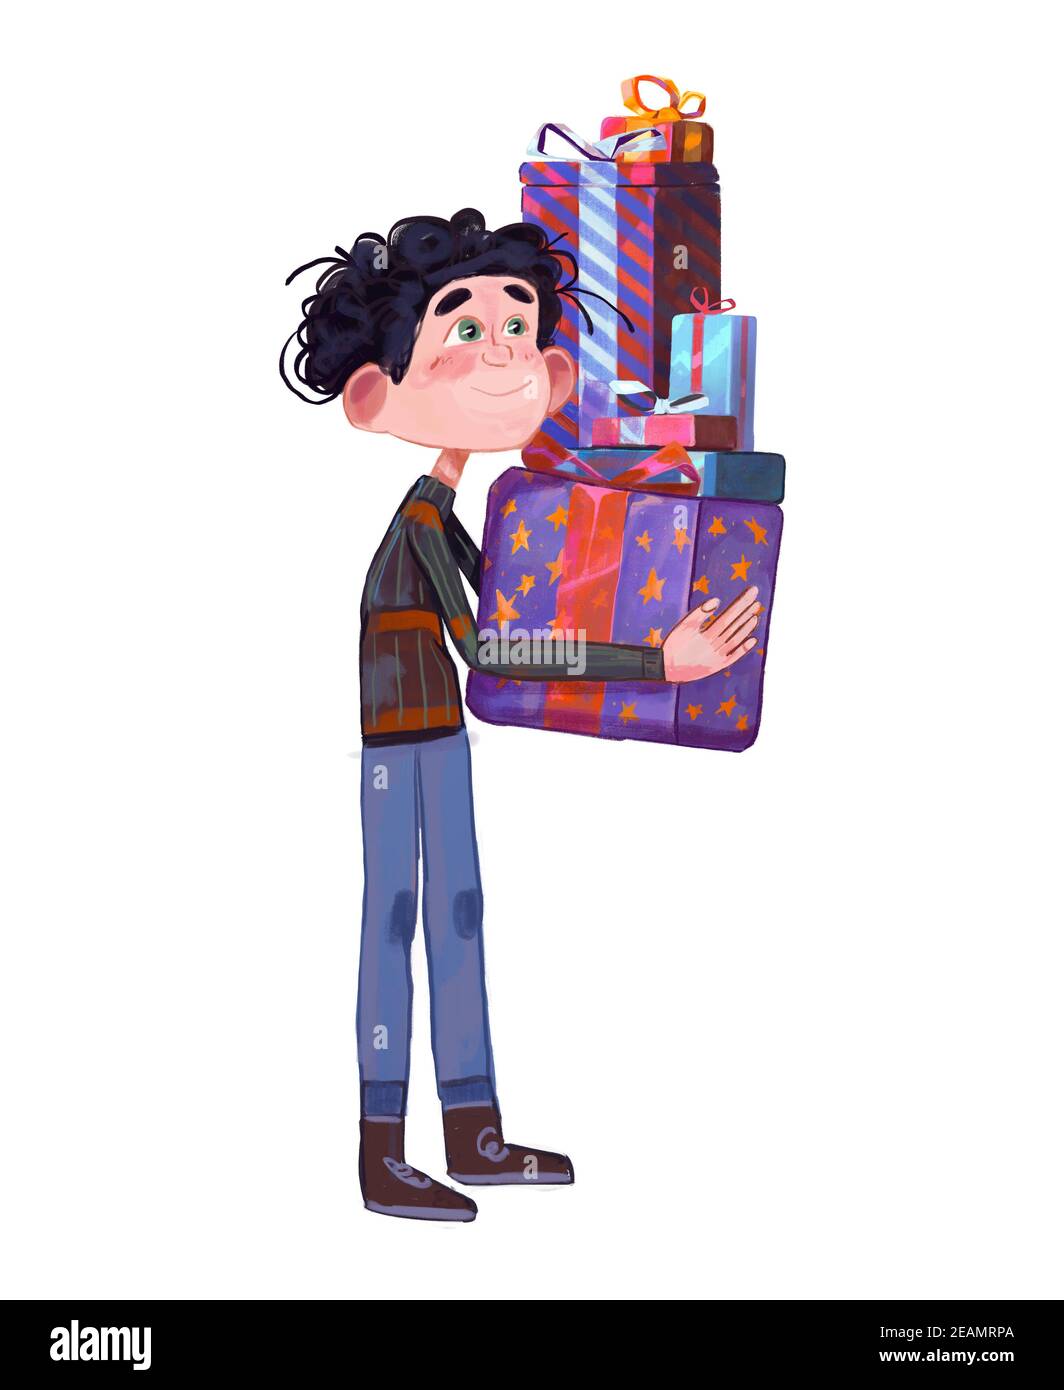 Shy boy holding big Christmas Presents and gift for Christmas. Watercolor illustration cartoon. Character design isolated on white. Holidays concept Stock Photo